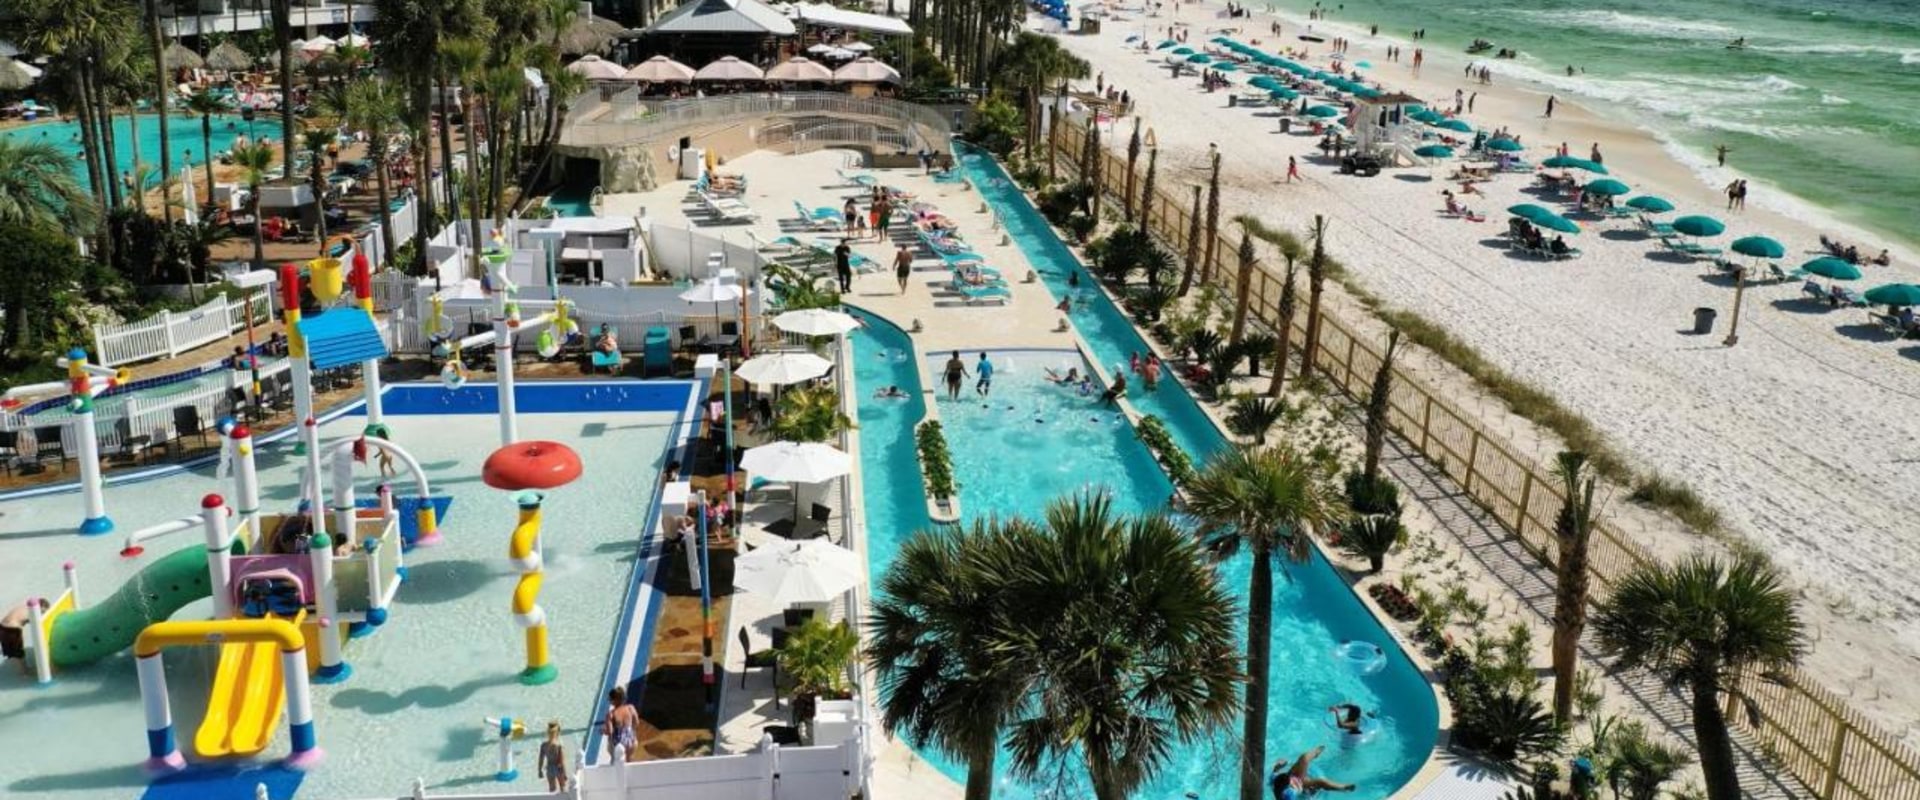 Swimming in Panama City Beach: Is it Safe and Allowed?